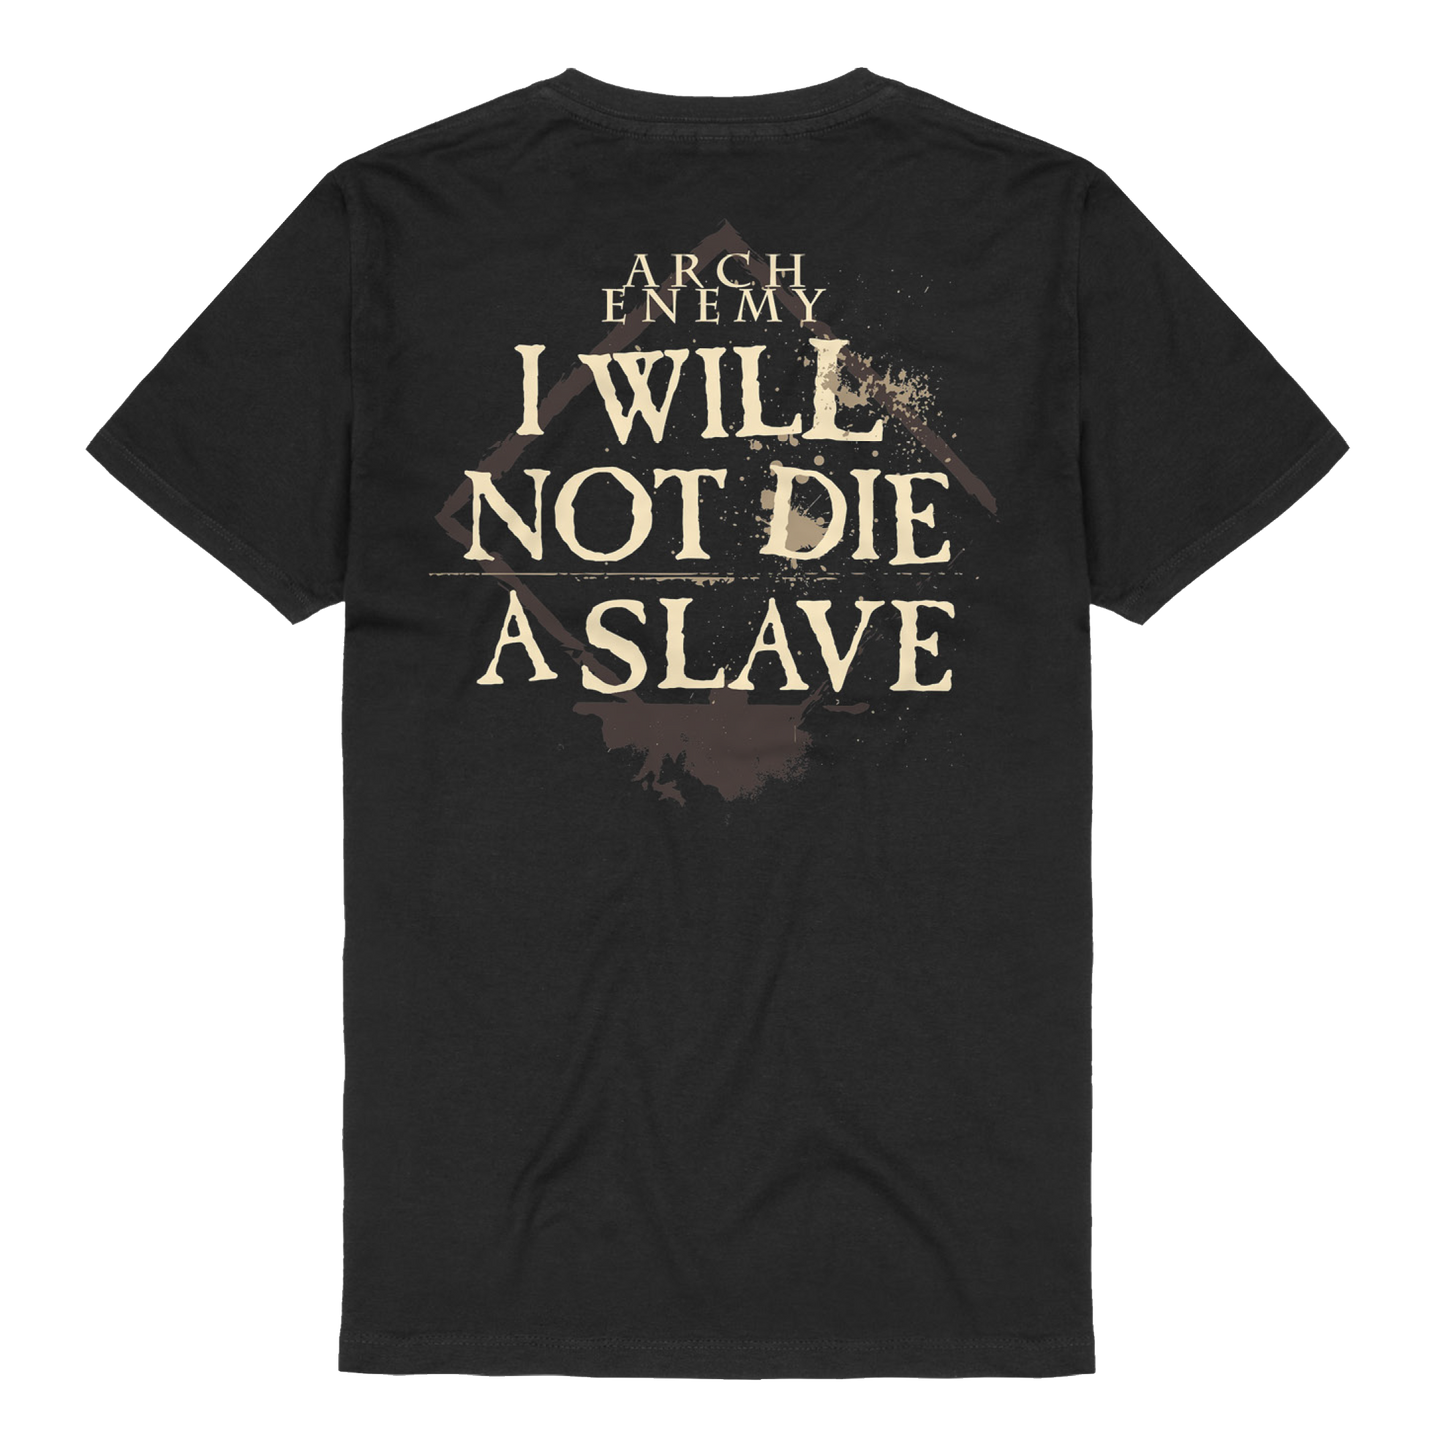 I WILL NOT DIE A SLAVE